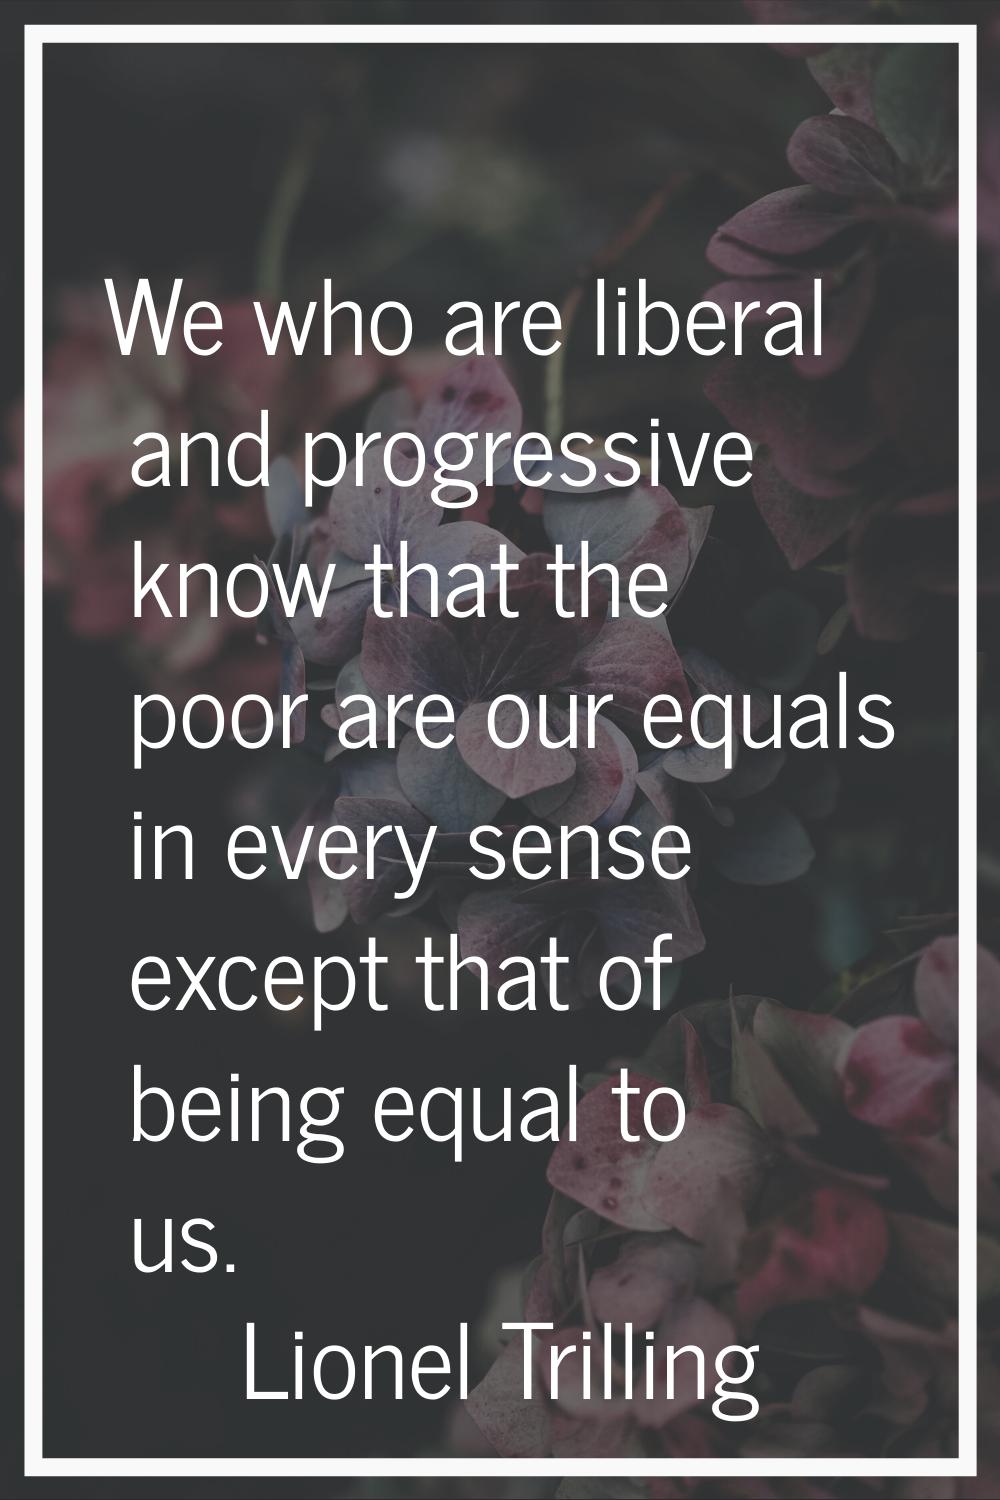 We who are liberal and progressive know that the poor are our equals in every sense except that of 